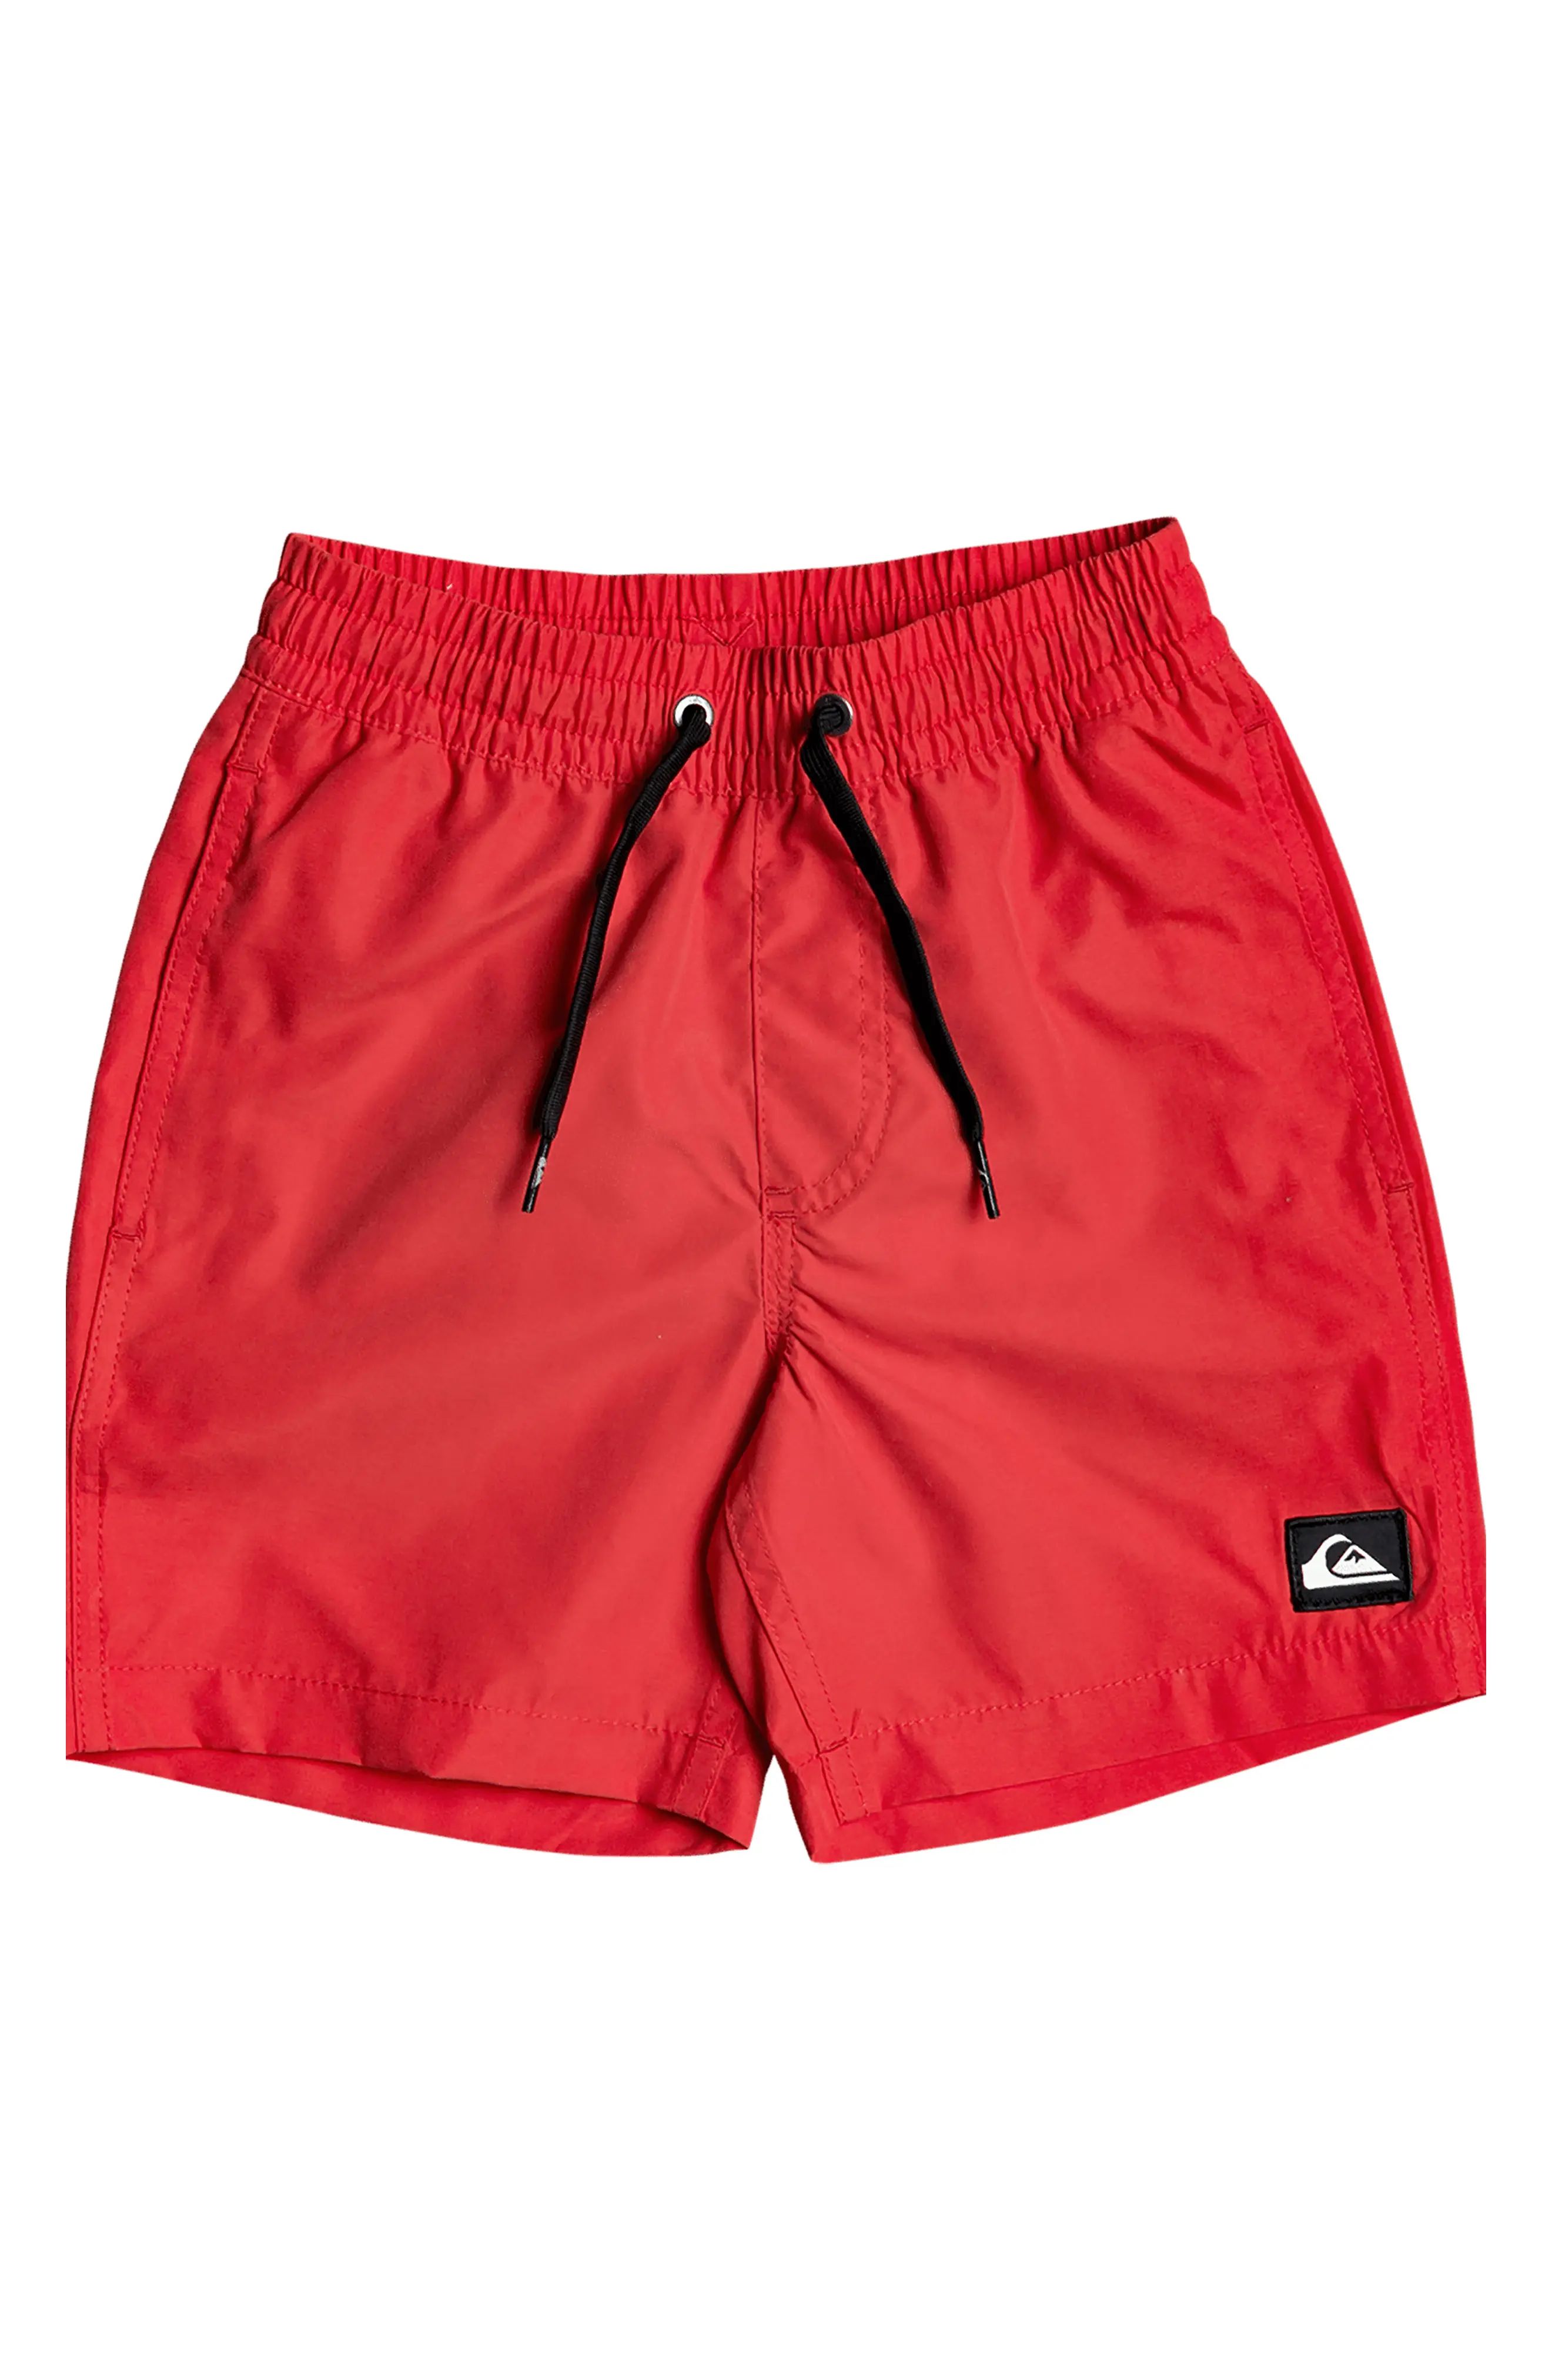 Boy's Quiksilver Everyday Volley Shorts, Size 4 - Red | Nordstrom